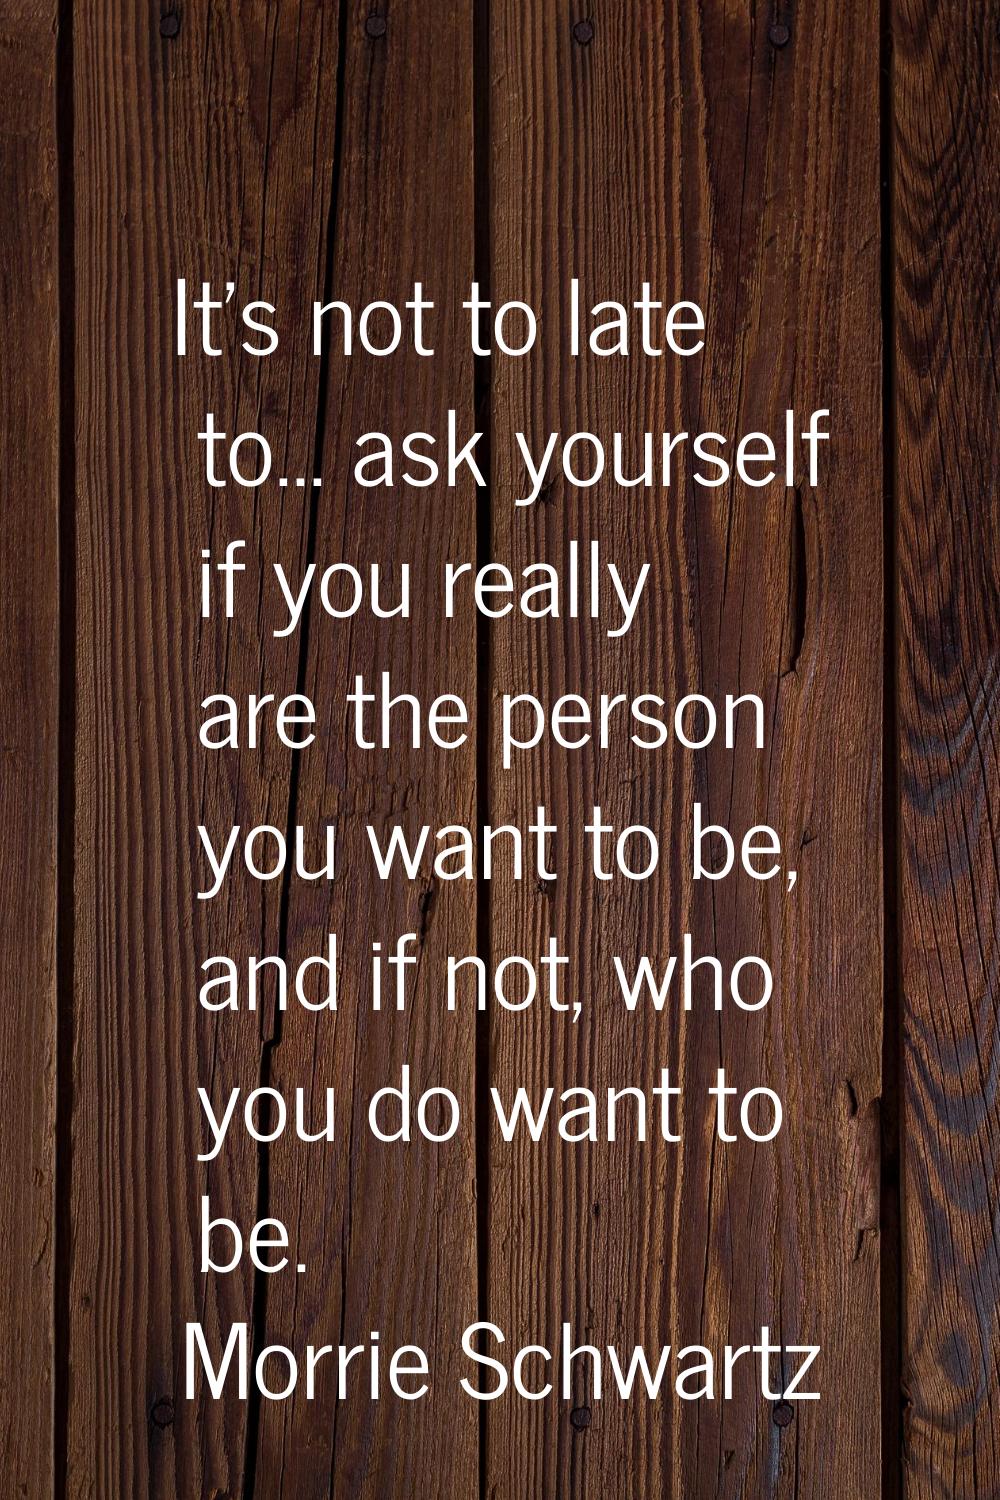 It's not to late to... ask yourself if you really are the person you want to be, and if not, who yo